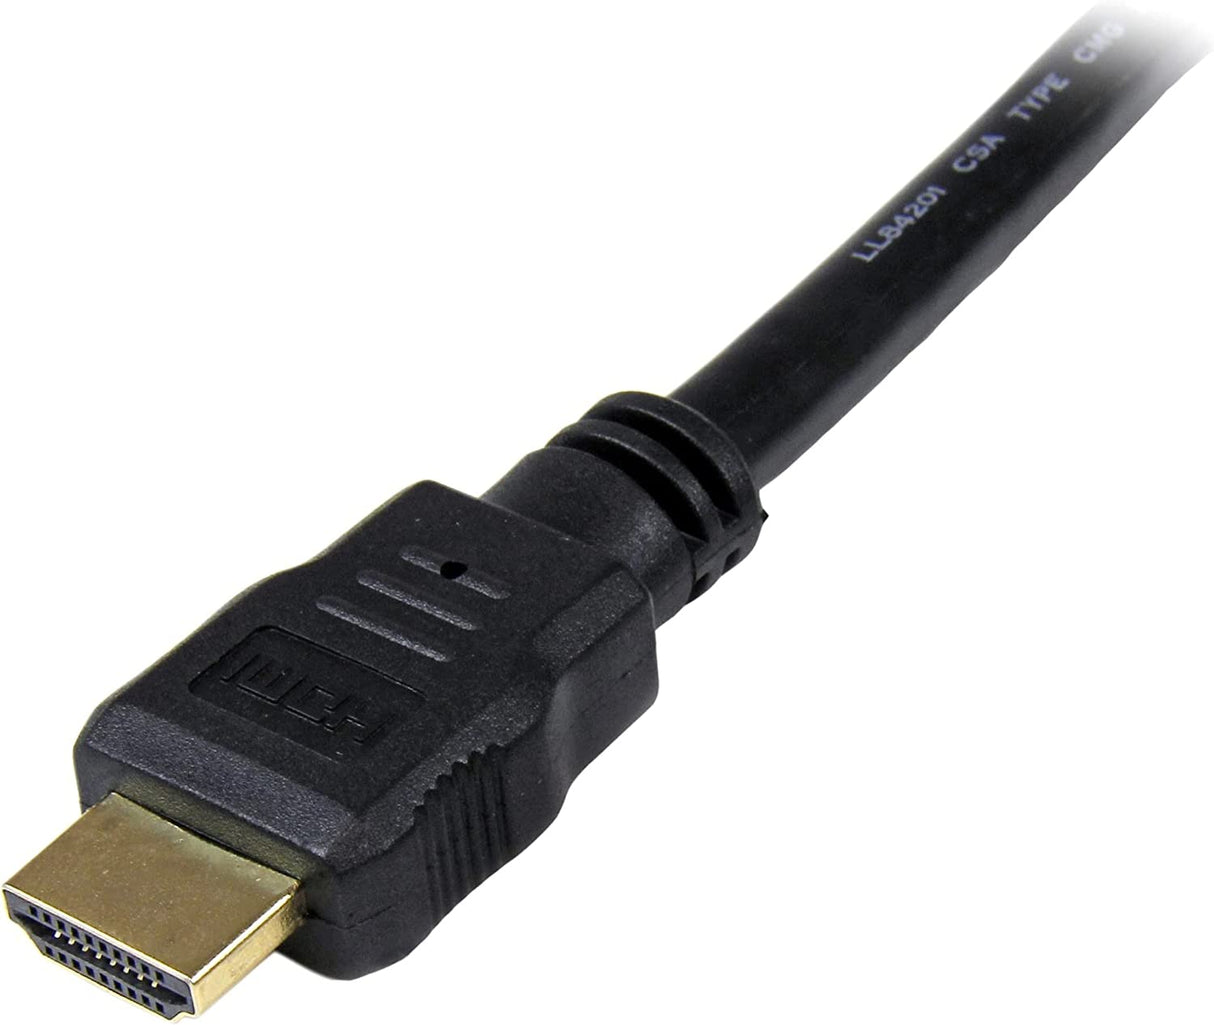 StarTech.com 10ft (3m) HDMI Cable - 4K High Speed HDMI Cable with Ethernet - UHD 4K 30Hz Video - HDMI 1.4 Cable - Ultra HD HDMI Monitors, Projectors, TVs &amp; Displays - Black HDMI Cord - M/M (HDMM10) 10 ft / 3m HDMI Cable